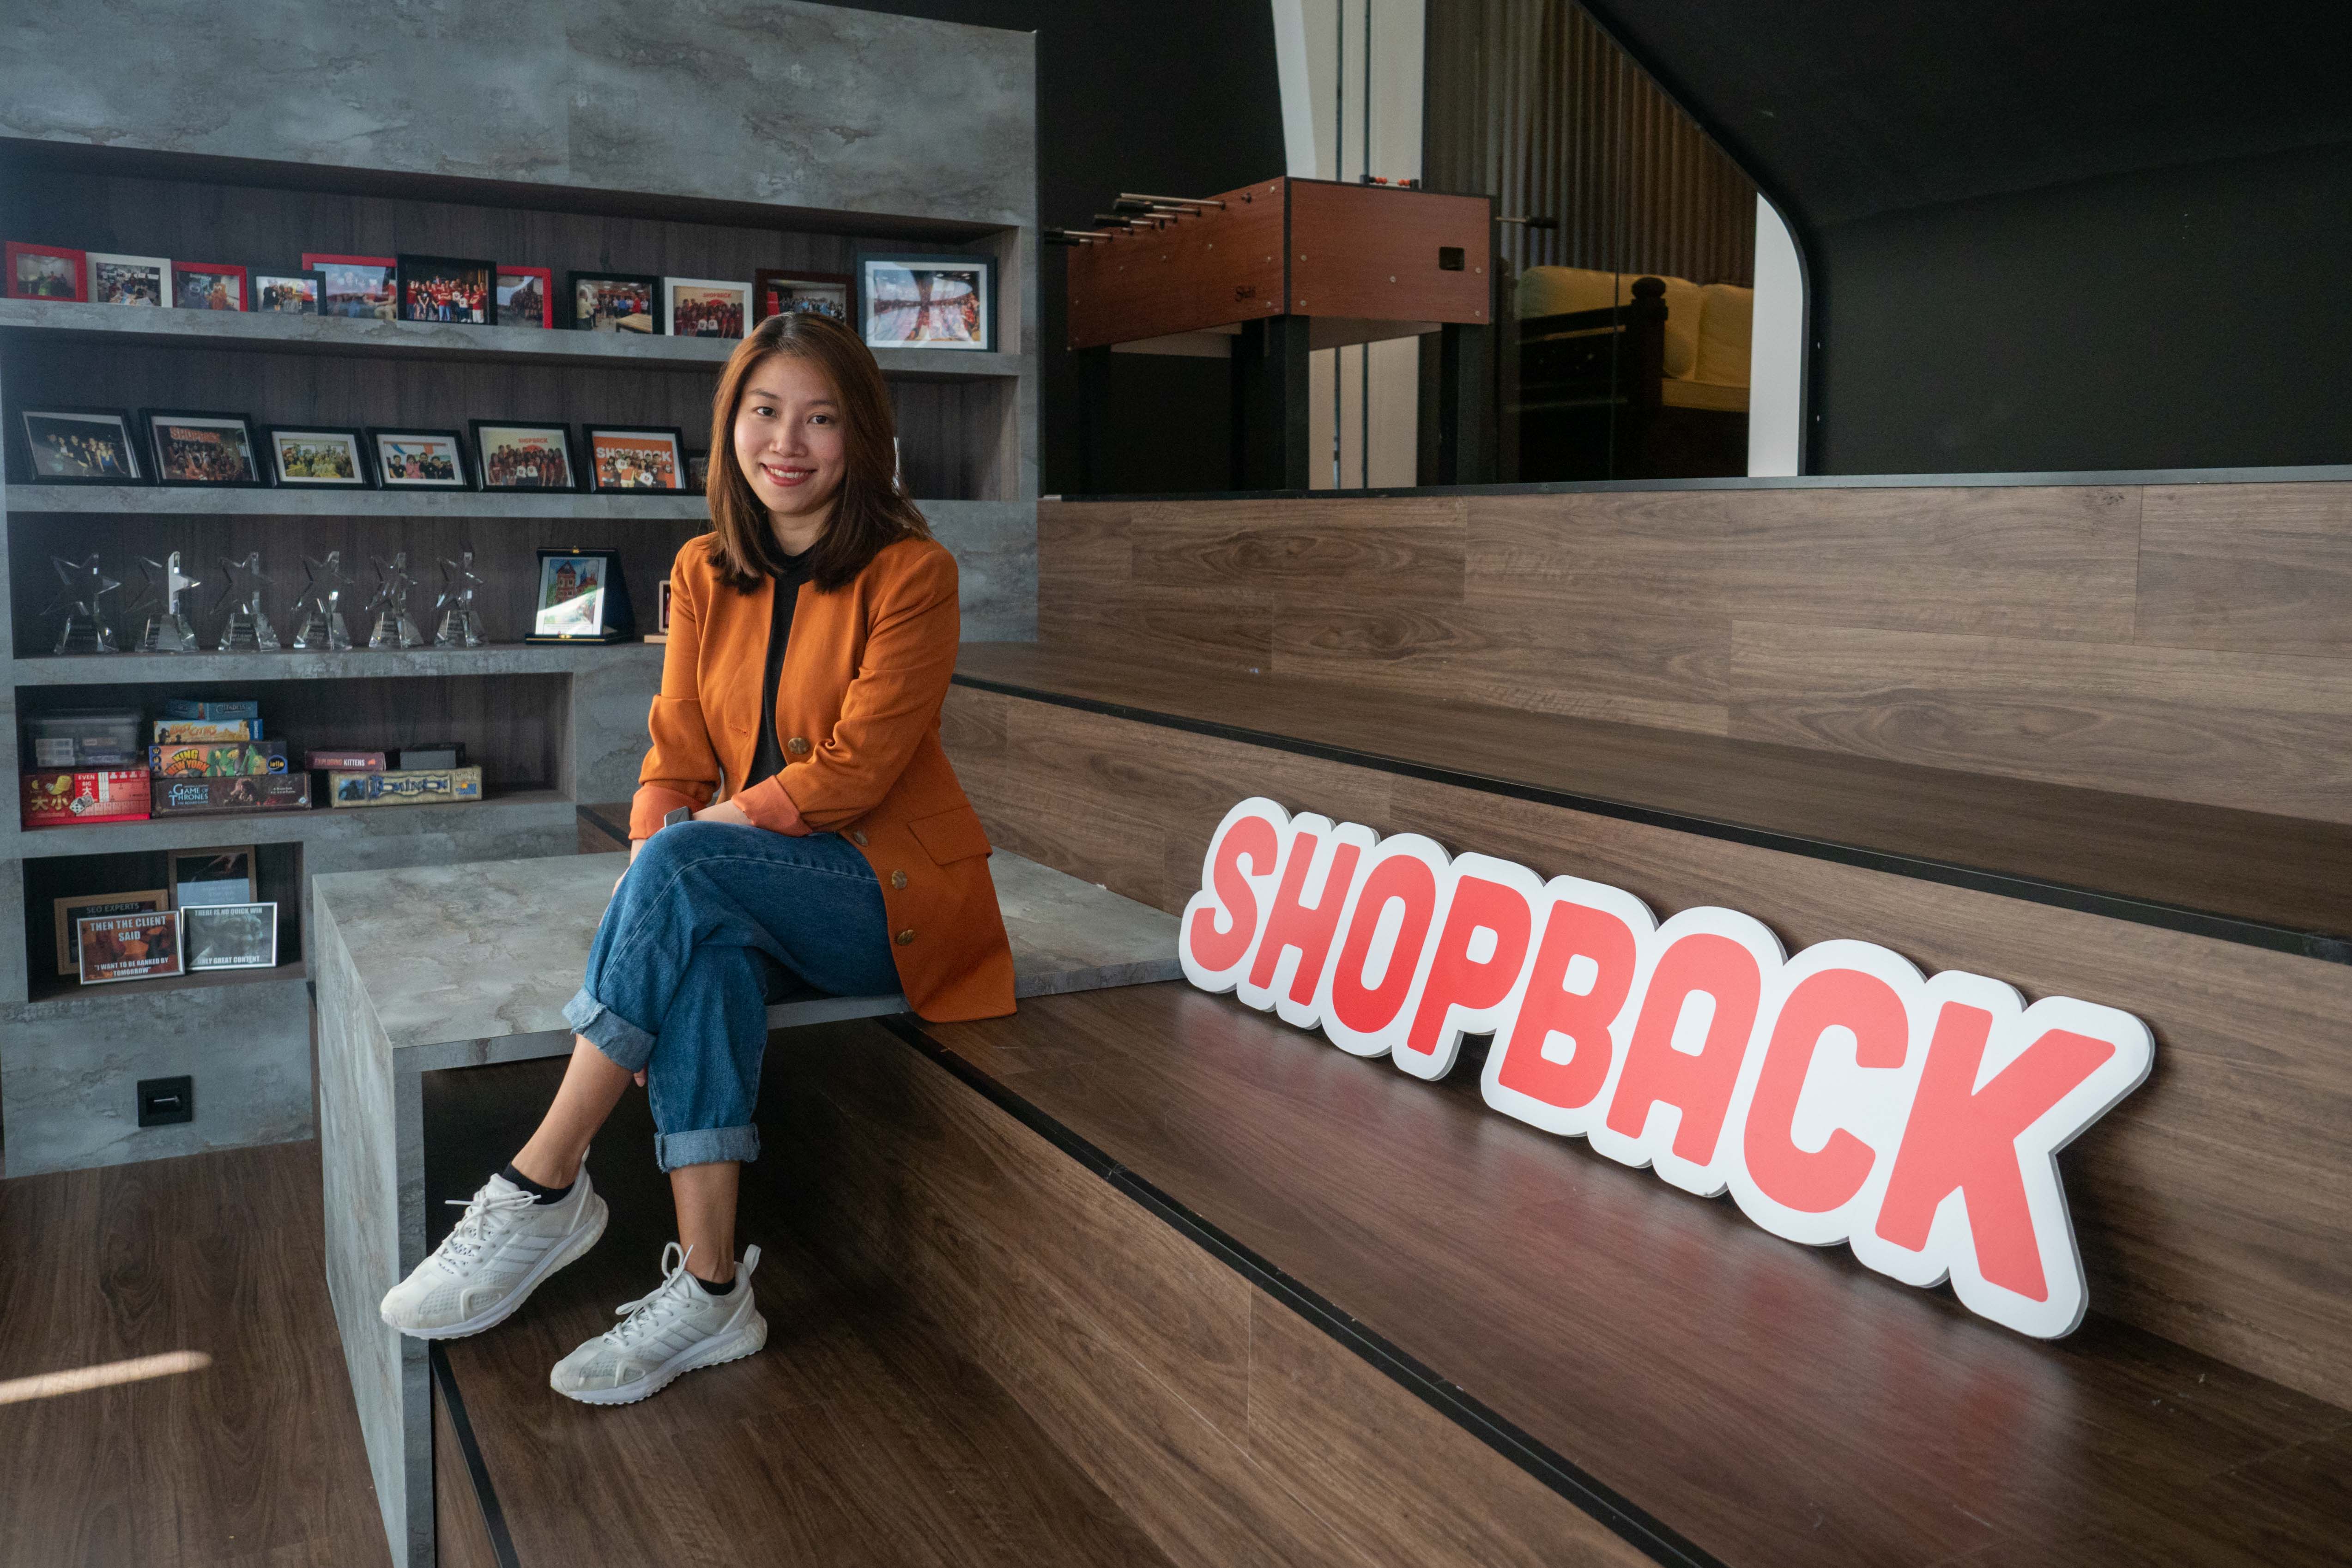 “Whatever you introduce — geographically expanding or product expansion — put together, they should fulfil that goal of what you're trying to do, which is create better shopping experiences every day,” said ShopBack’s head of global expansion, Ms Josephine Chow.